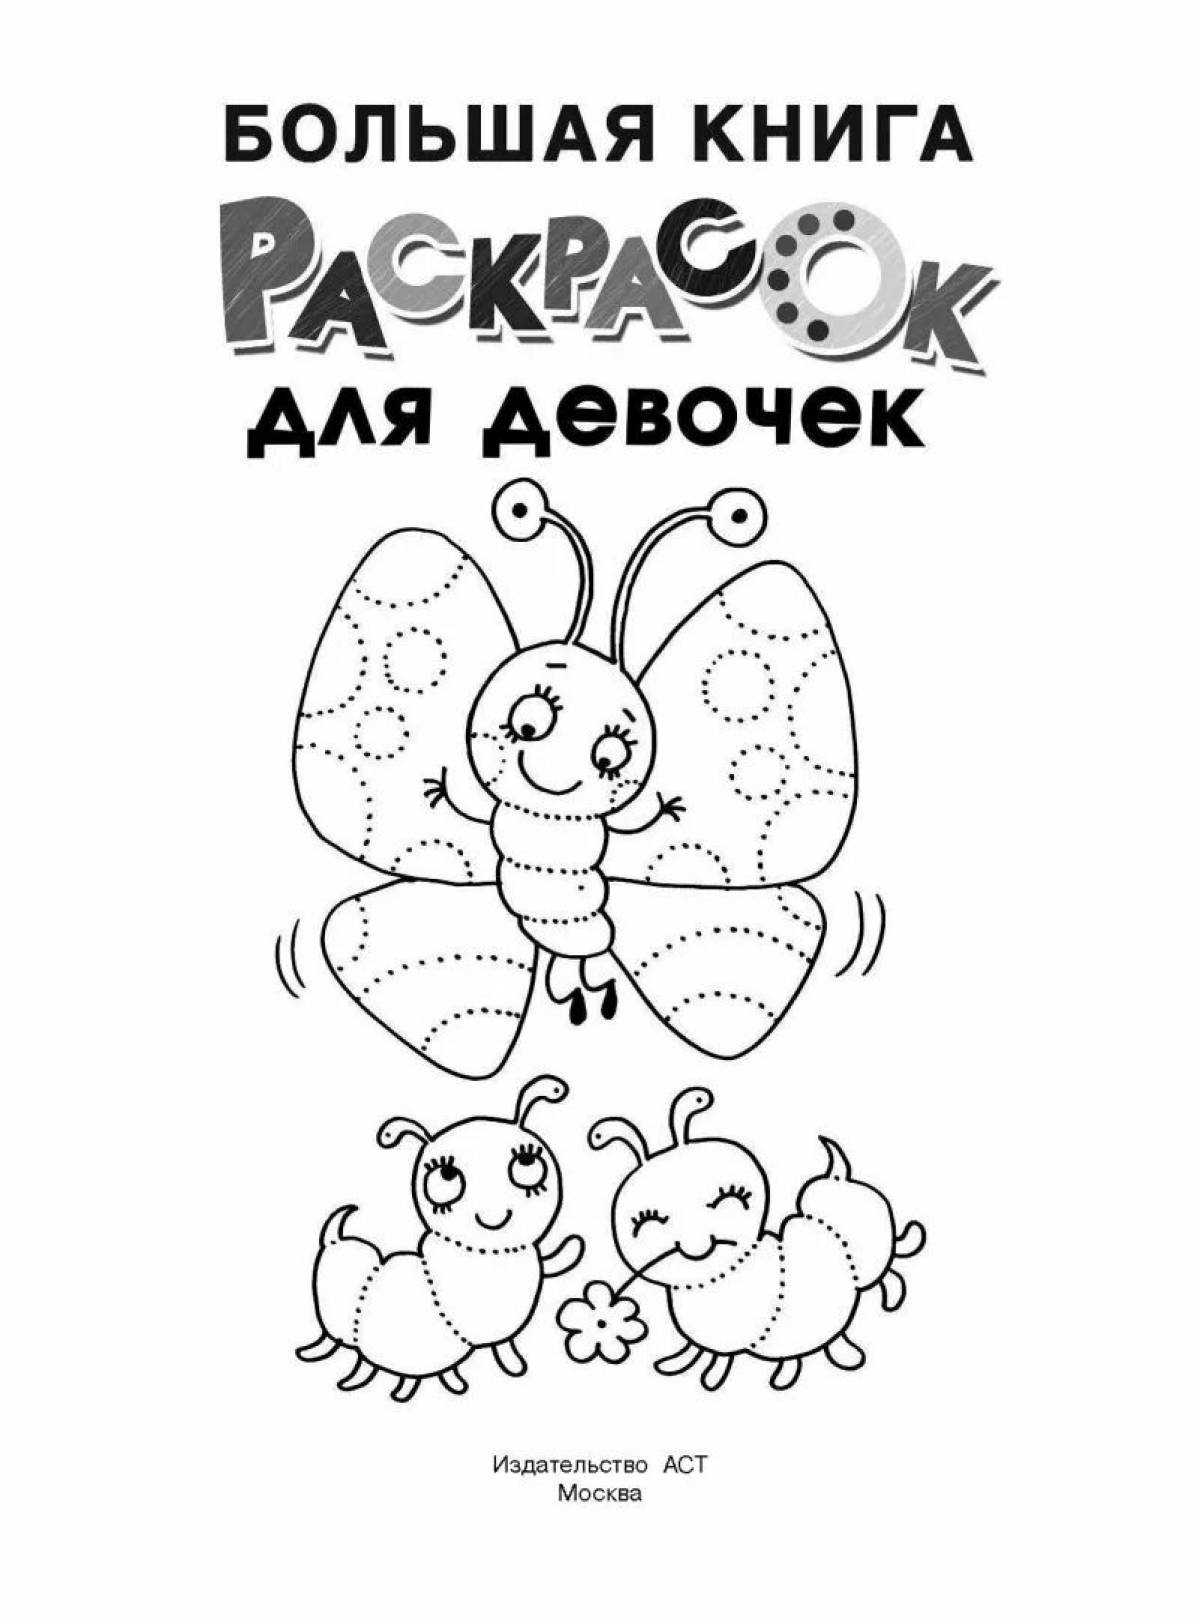 Name of coloring page